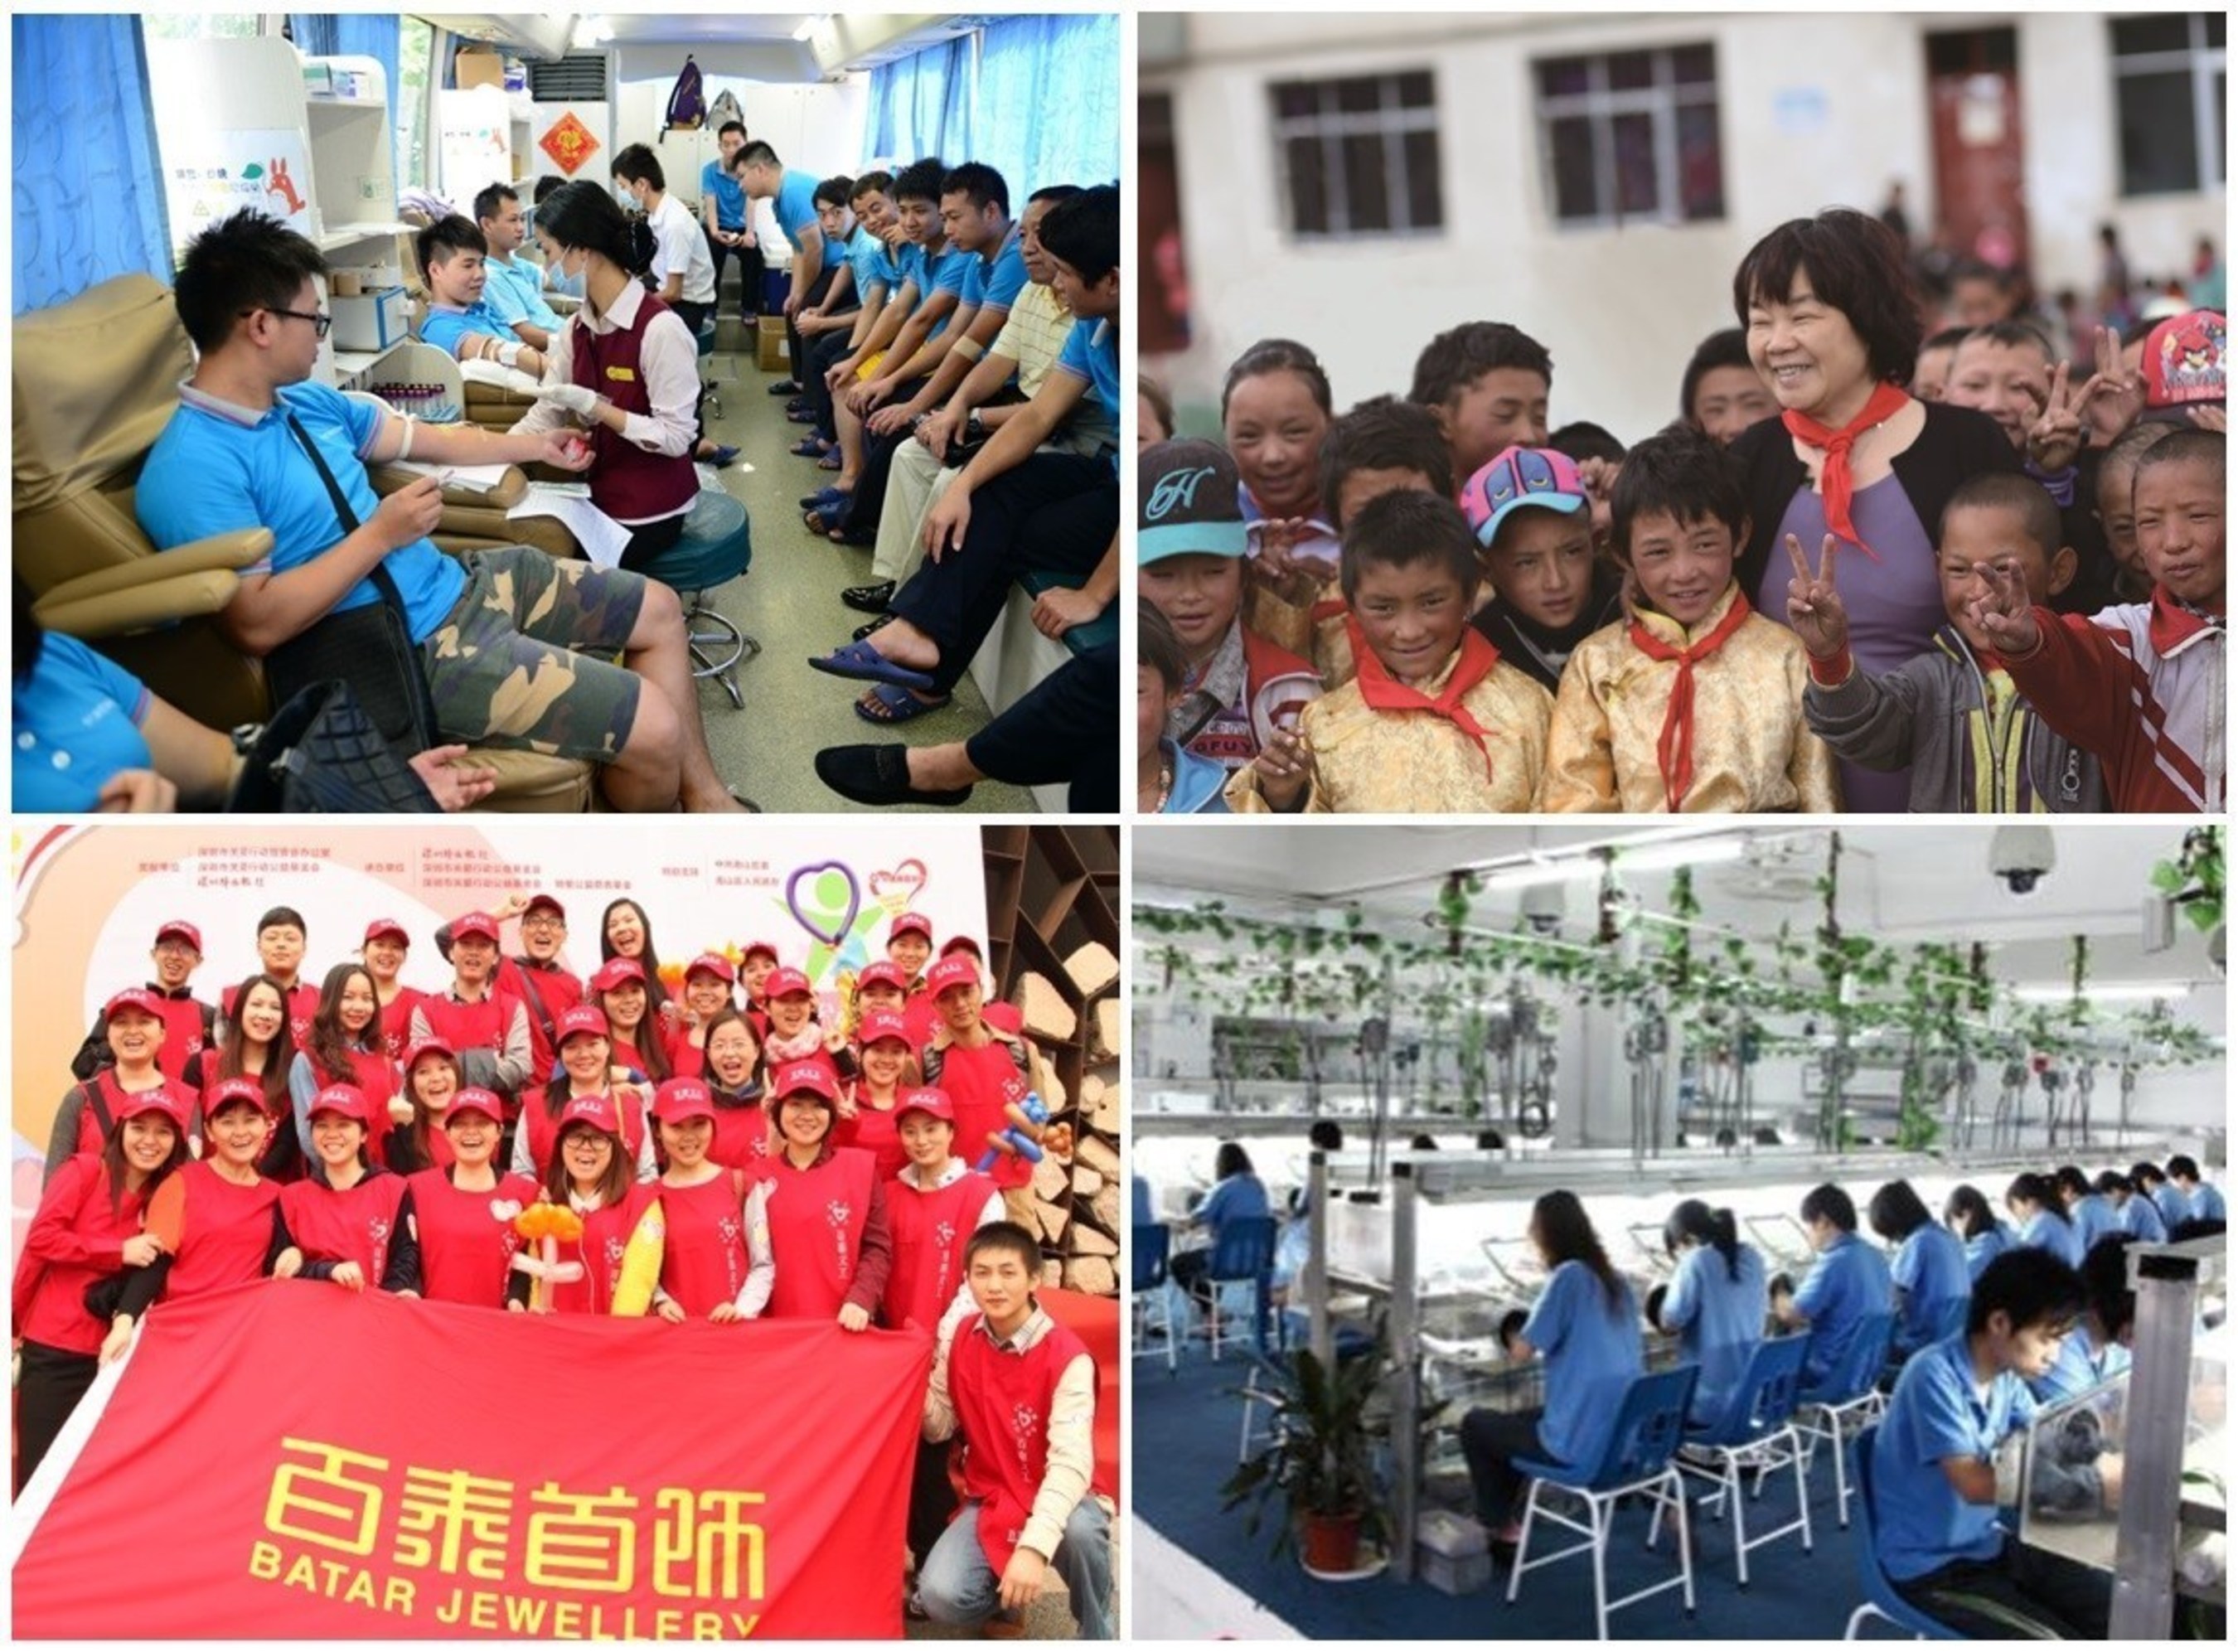 (From top left, clockwise) Employees at Shenzhen Foreway Jewellery Group Co Ltd participating in a blood drive; Wang Chunli, General Manager of Beijing Cai Shi Kou Department Store Co Ltd in Tibet for a charitable cause; environmental-friendly workplace at Shenzhen Y&M Jewelry Co Ltd; and Shenzhen Batar Investment Holding Group Co Ltd team completing a community walkathon